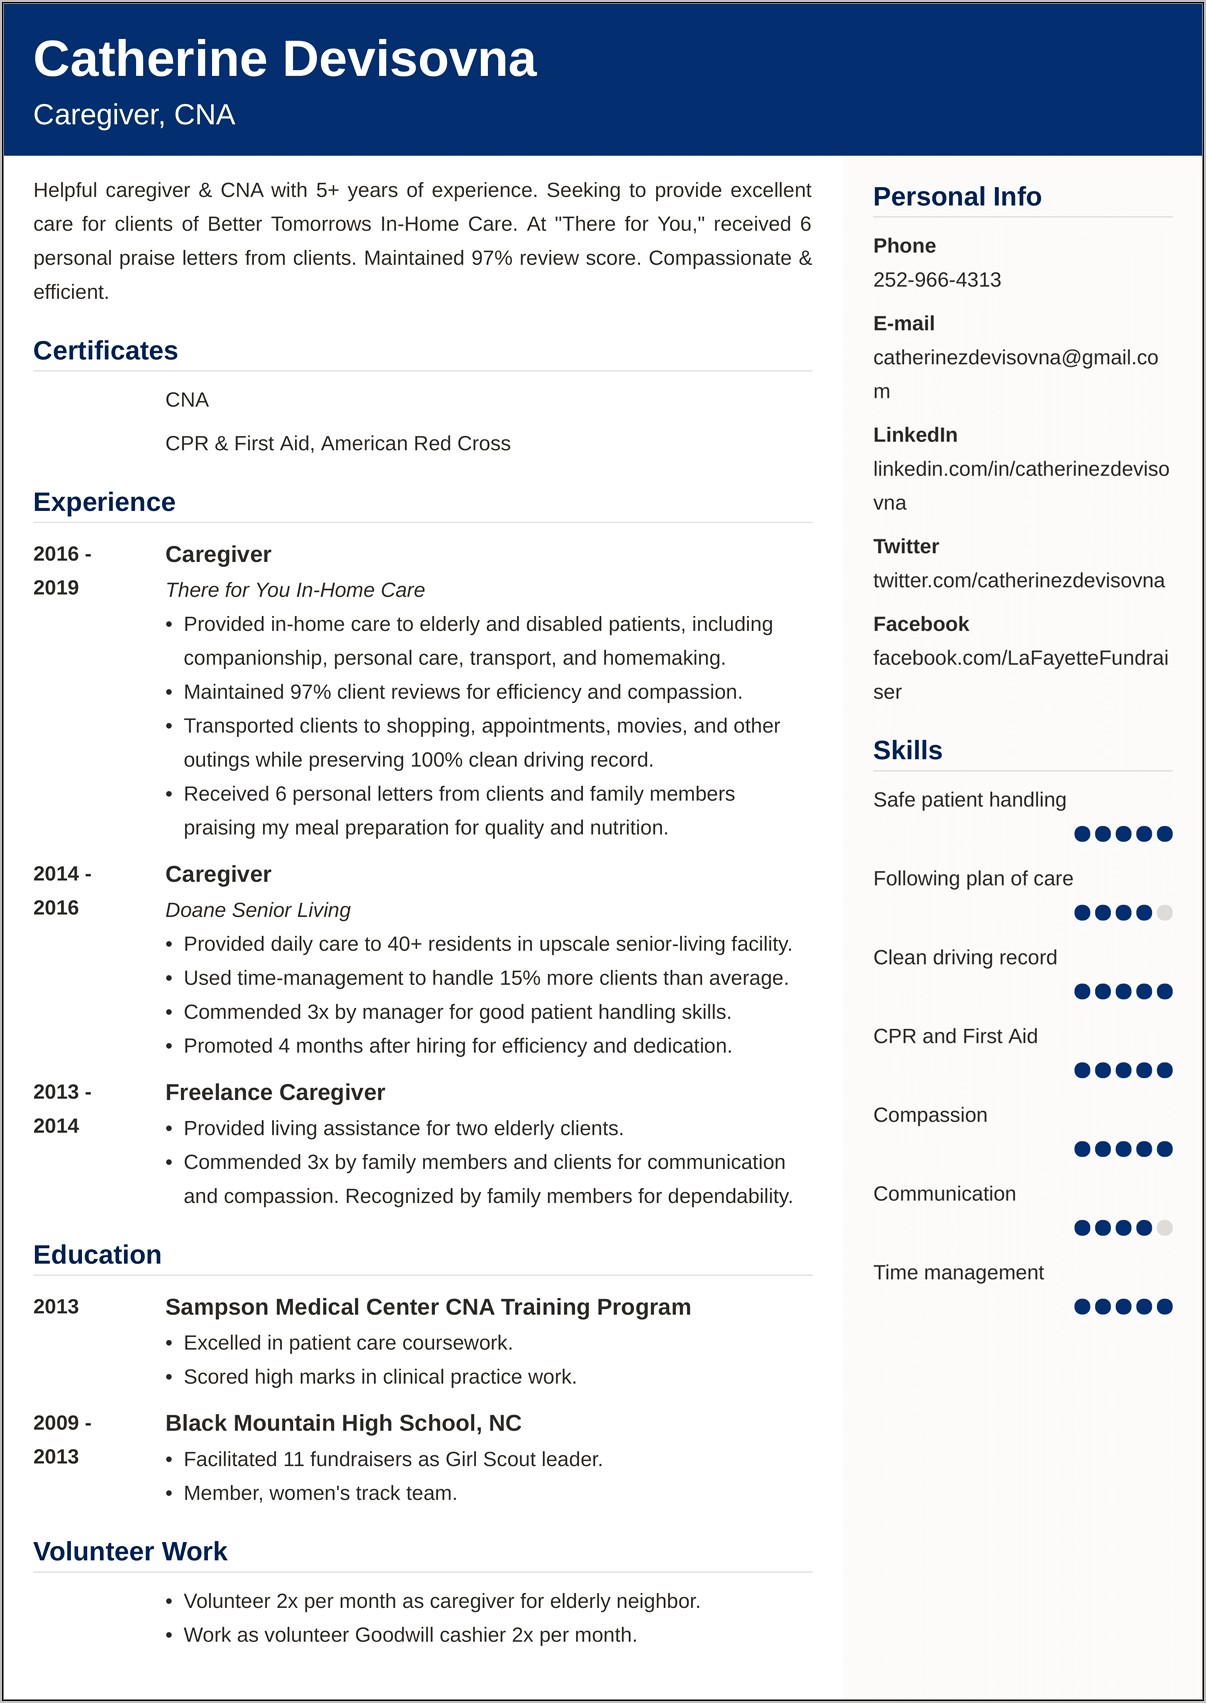 Exampole Of Resumes Working With Disabilities